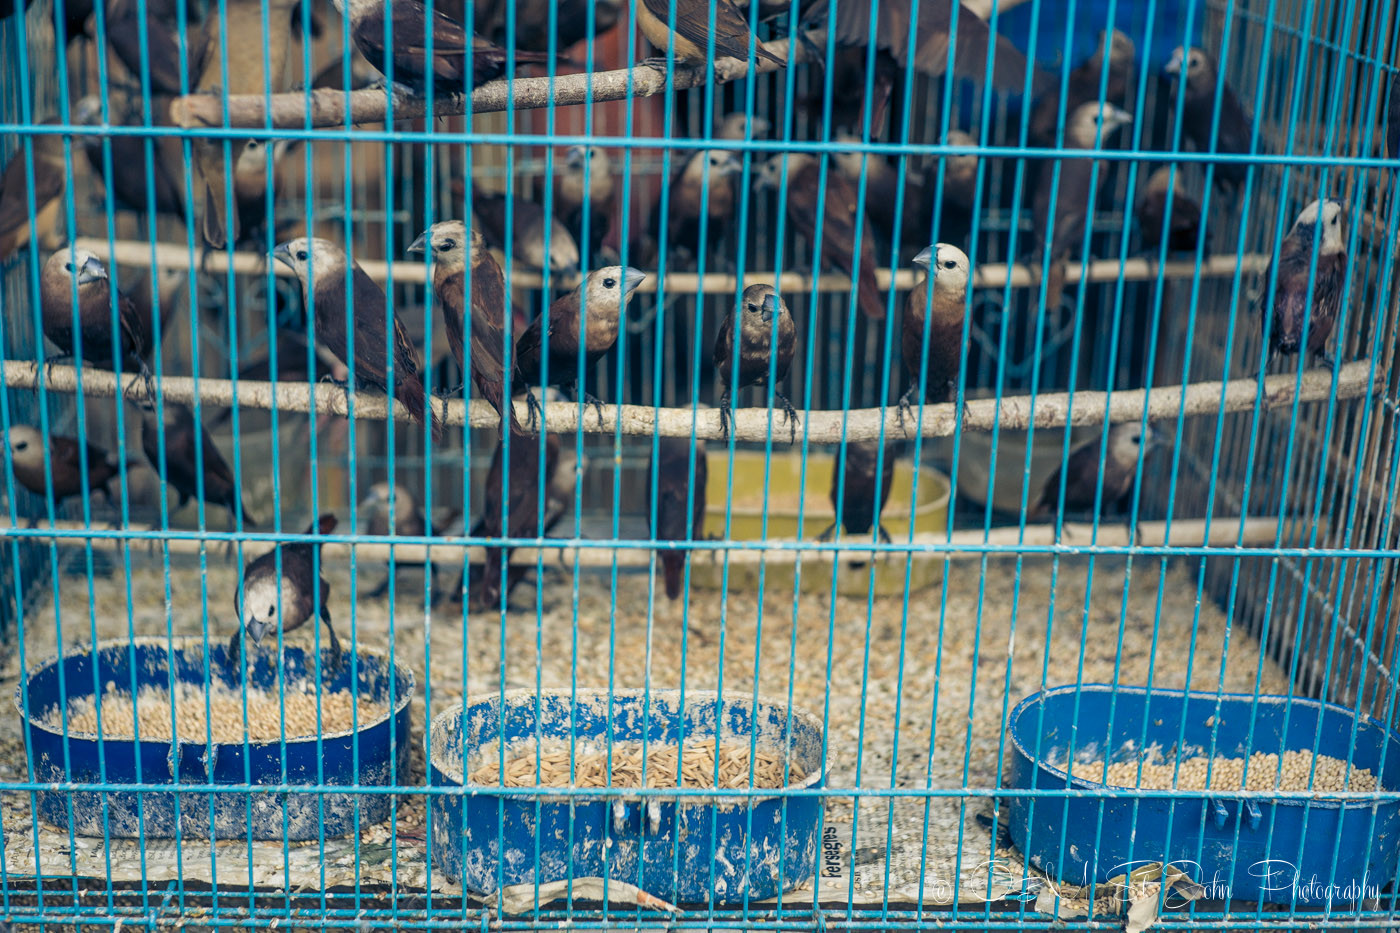 Birds in cages at the Malang Bird Market, East Java, Indonesia